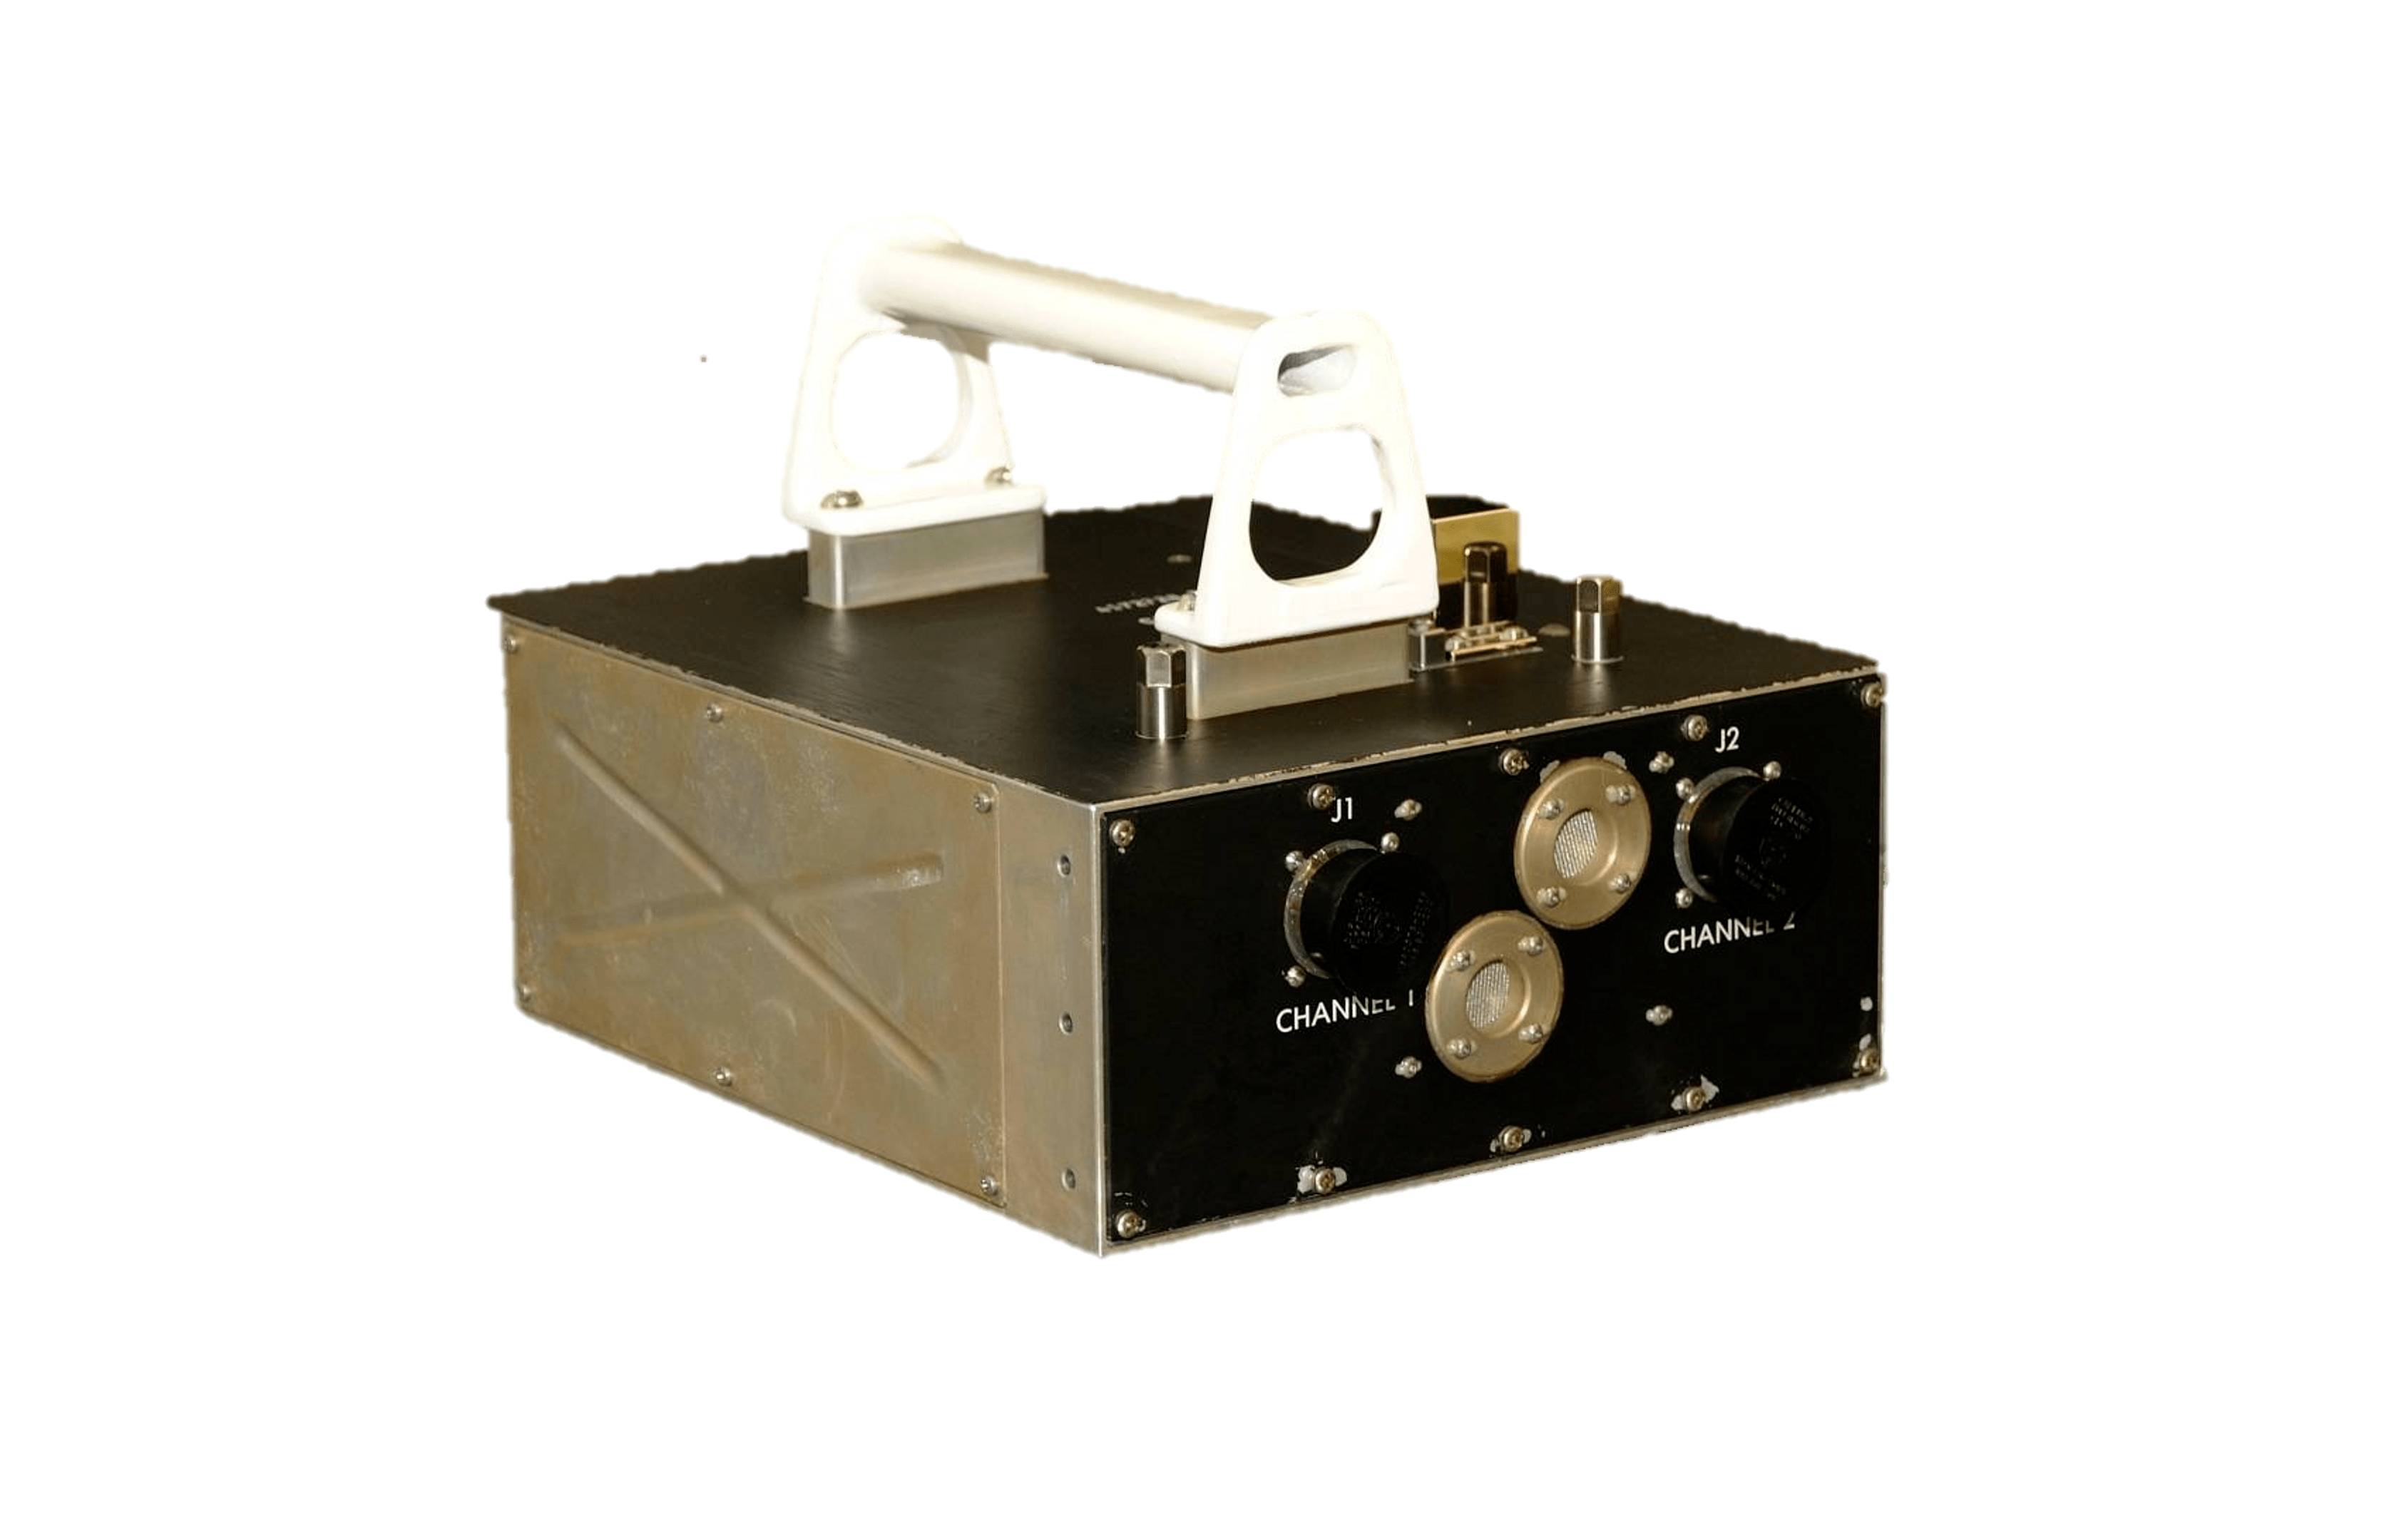 A box with a handle that contains two Hubble gyroscopes